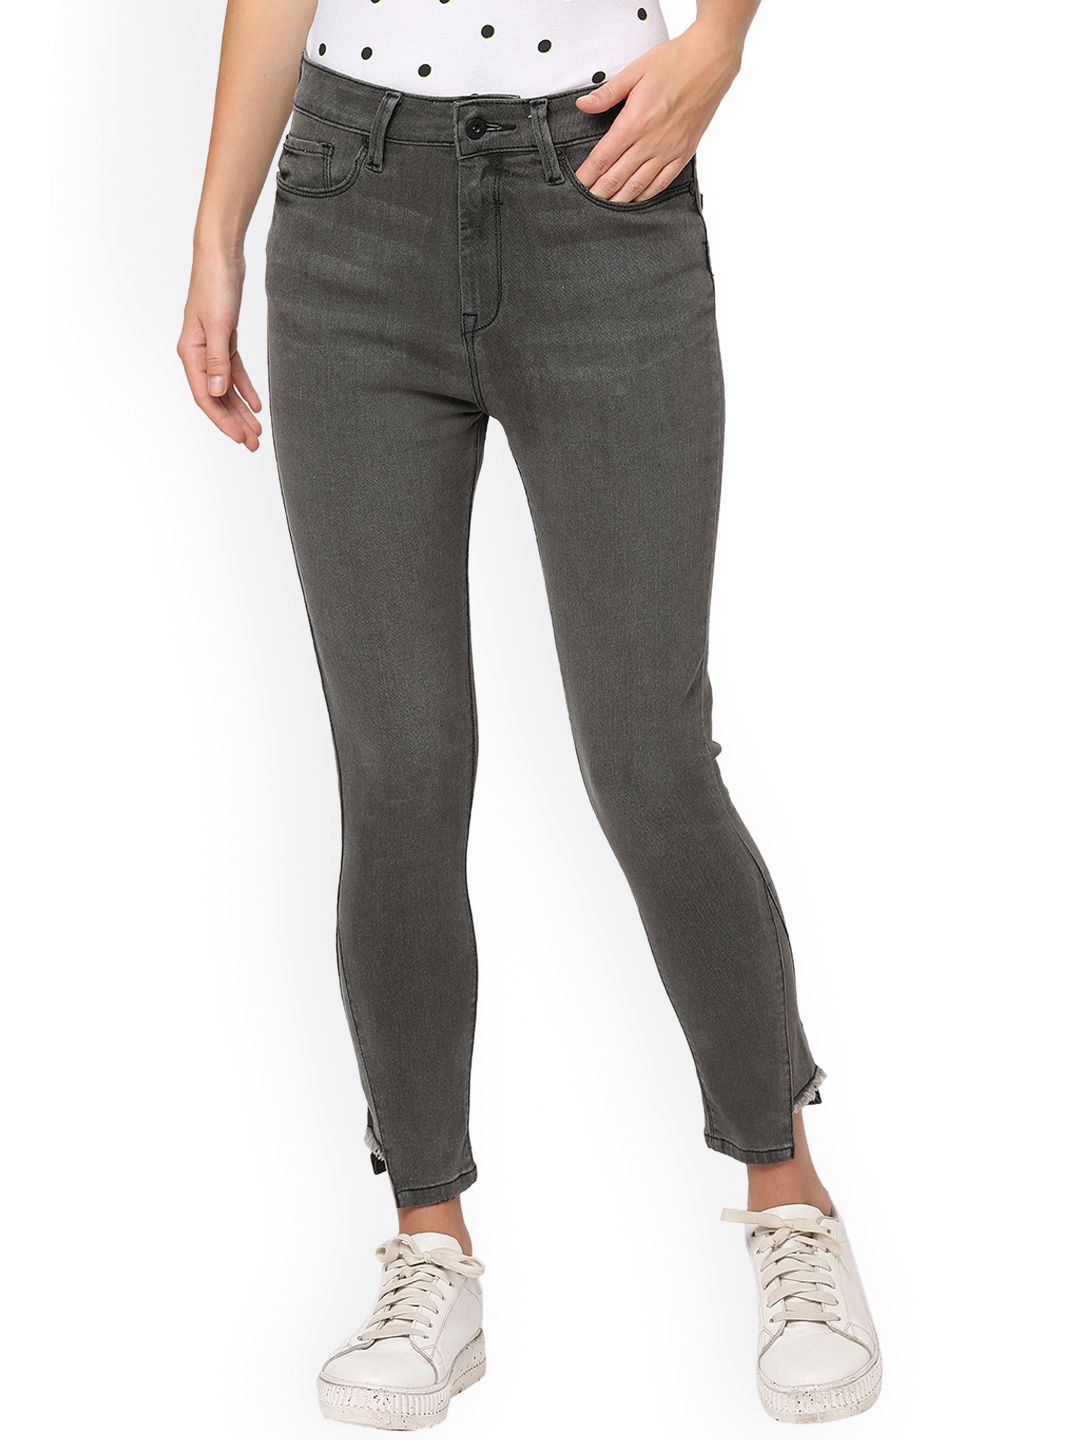 Pepe Jeans Women Grey Skinny Fit High-Rise Jeans Price in India